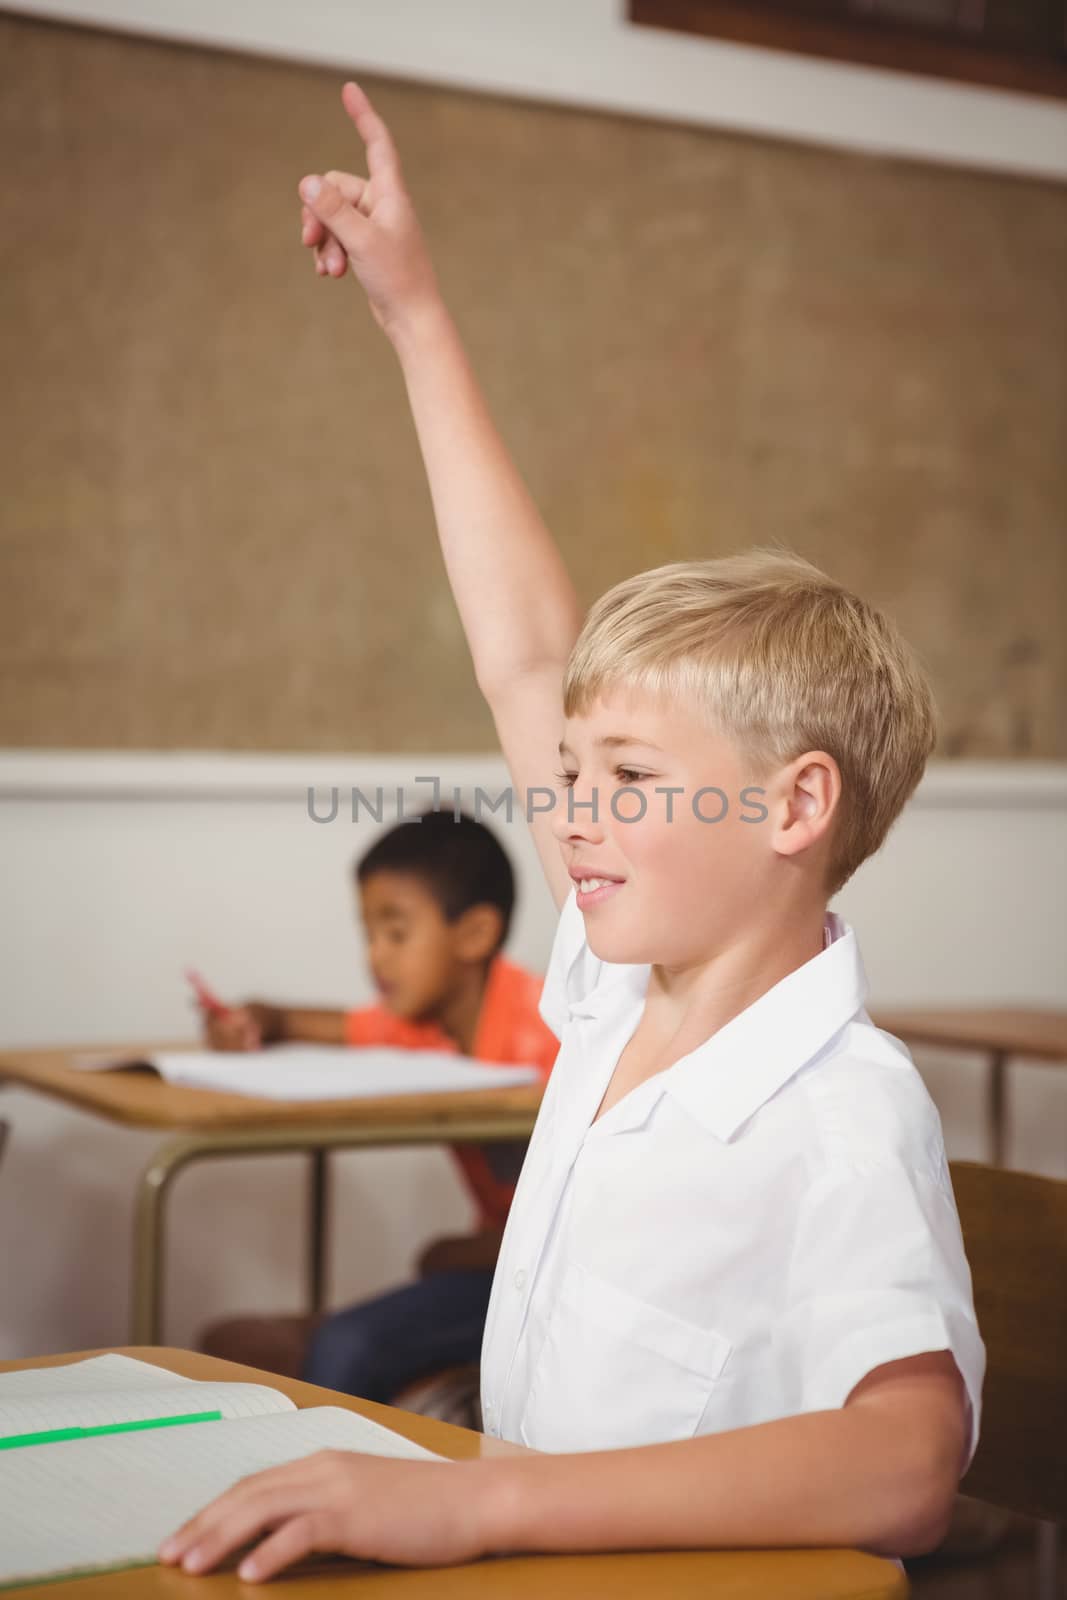 Student raising hand to ask question at the elementary school